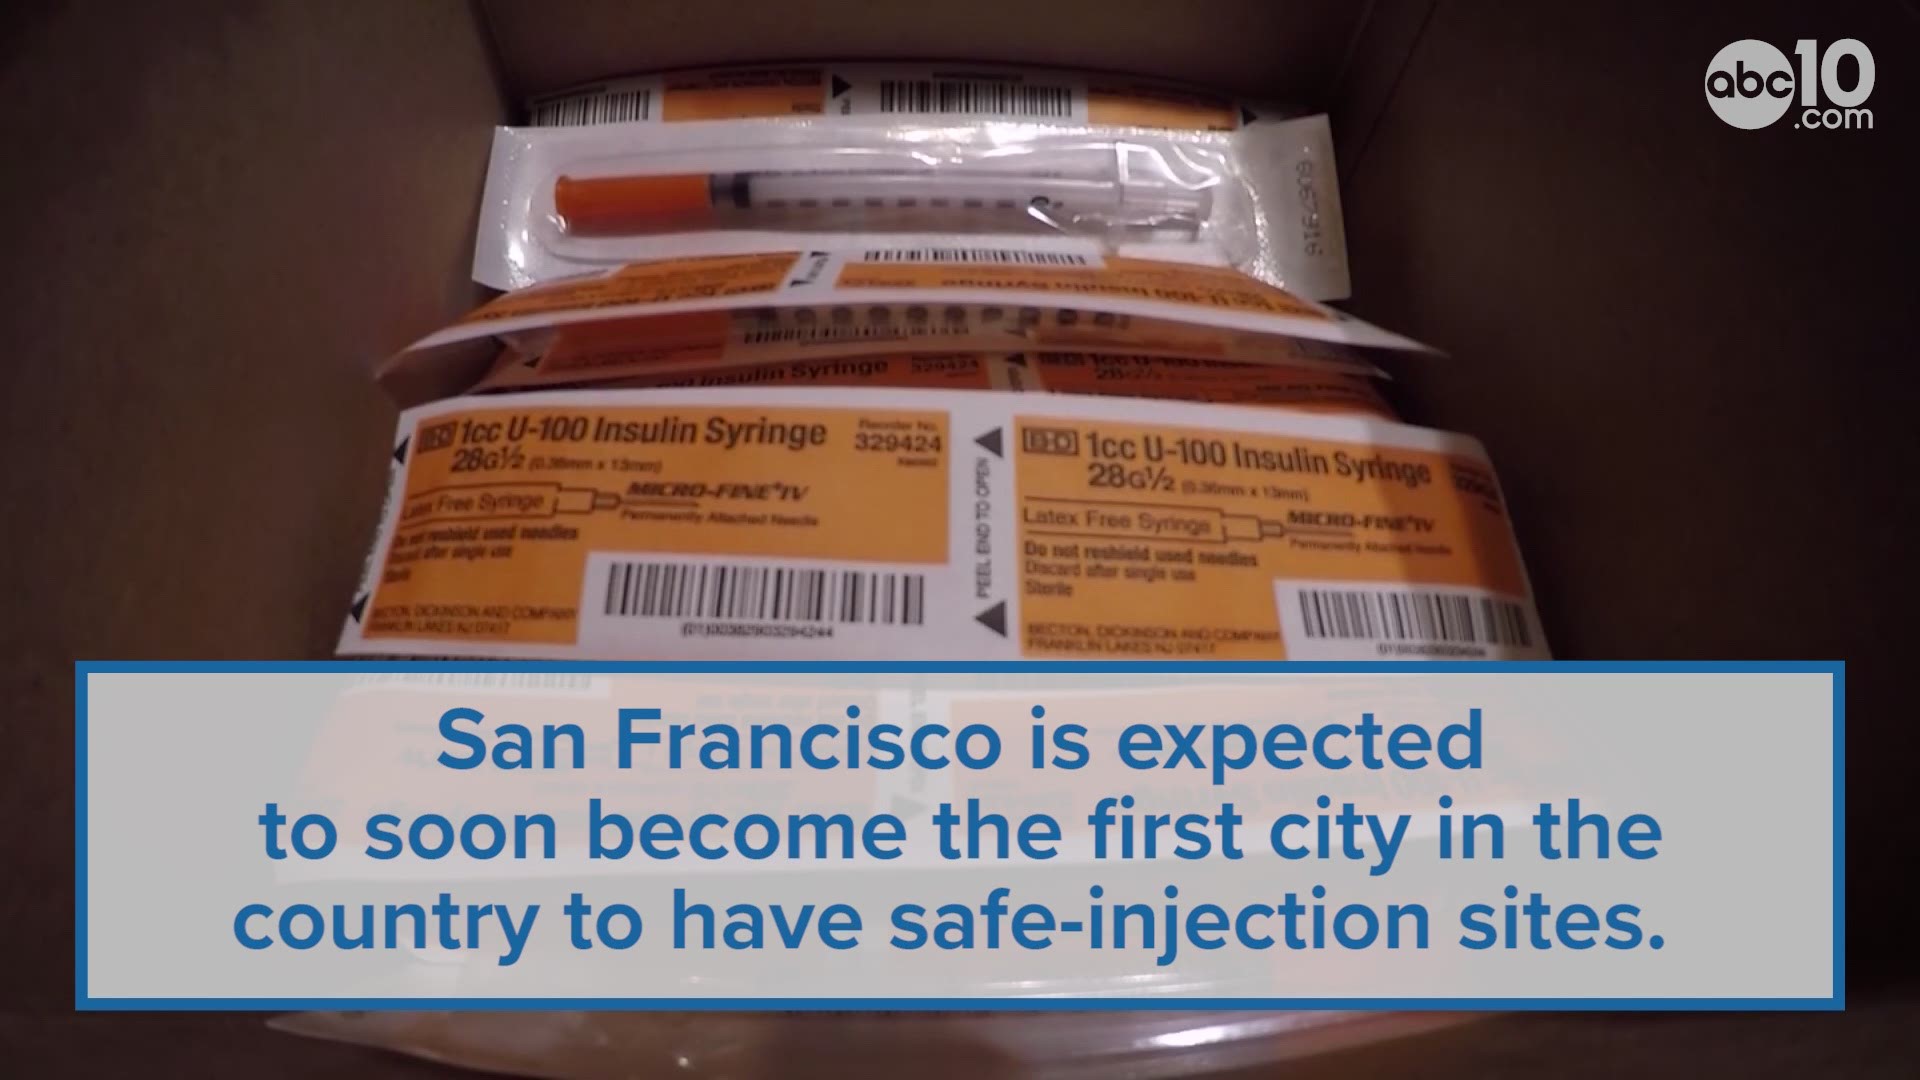 As San Francisco, California moves closer to opening overdose prevention sites, Assembly Member Susan Eggman answers questions about the plan. Do these sites, where people could use drugs, like heroin, under the supervision of staff, enable users? How wil